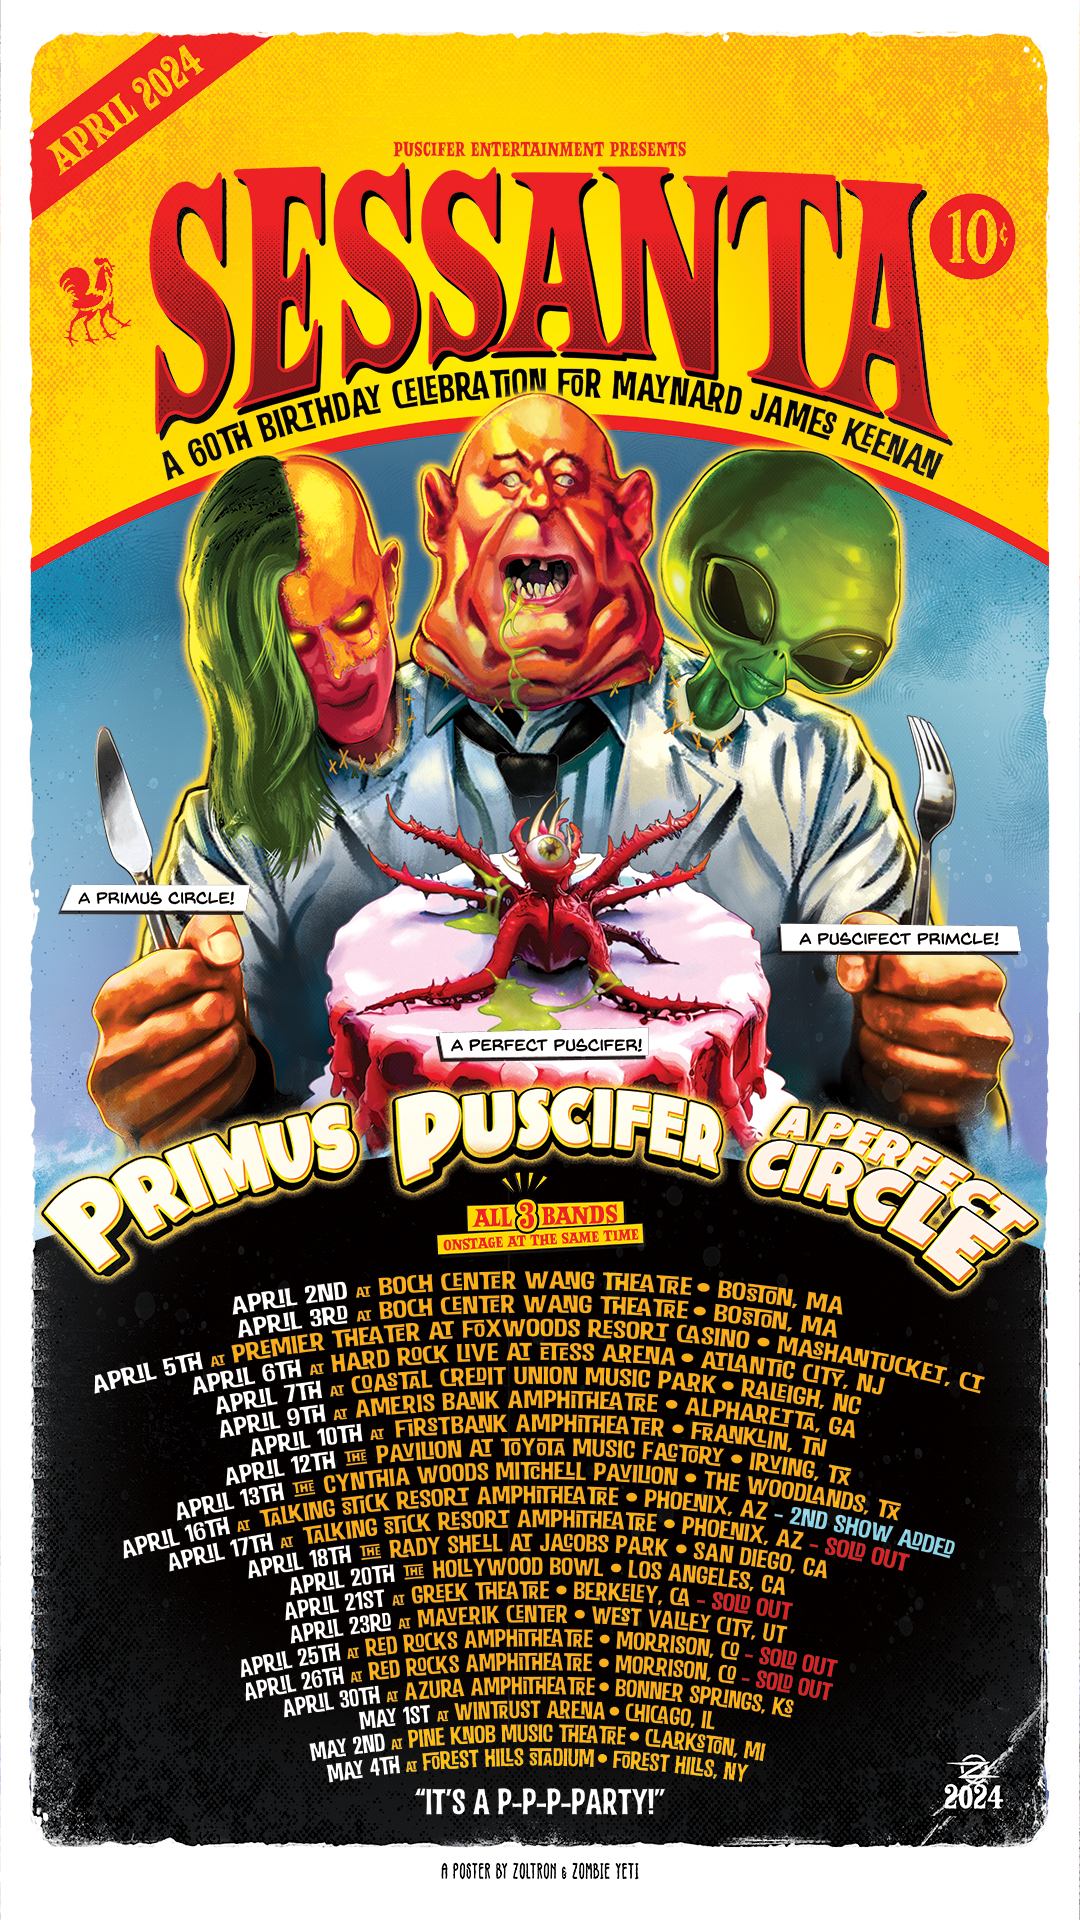 The Sessanta E.P.P.P - New Music from Puscifer, Primus & A Perfect Circle Arrives March 29 via Puscifer Entertainment